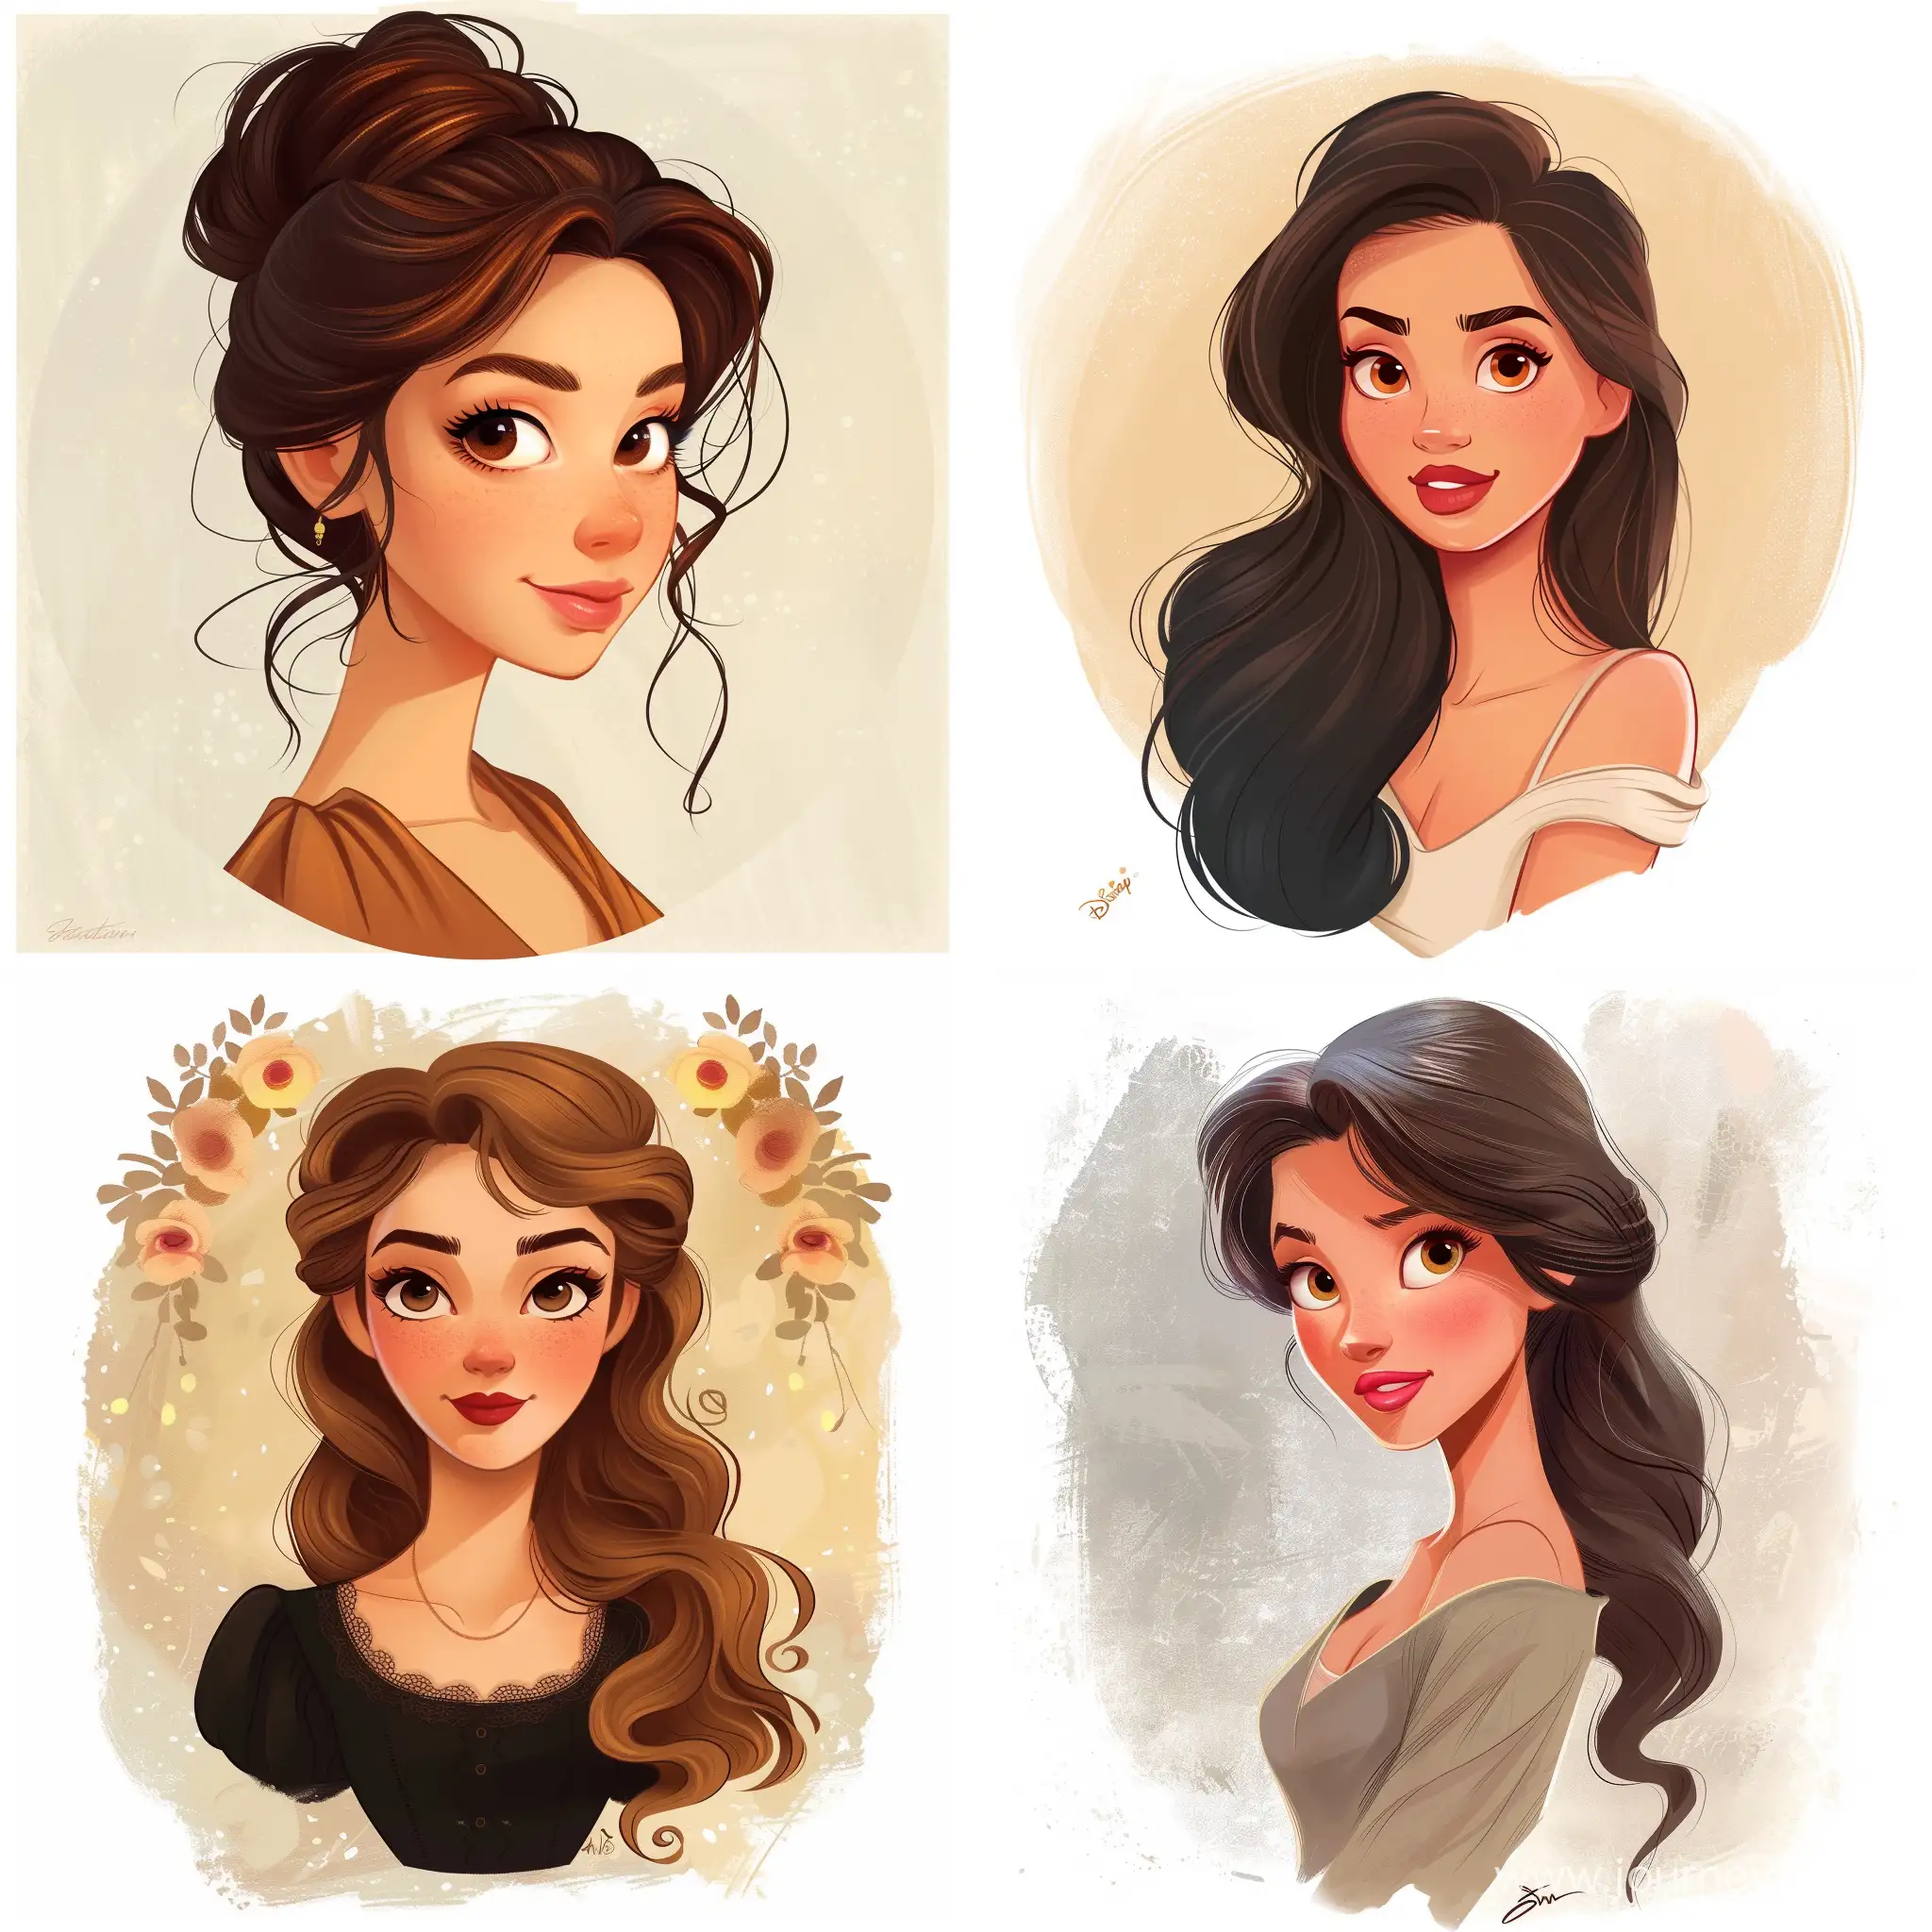 DisneyStyle-Portrait-Illustration-with-Vibrant-Colors-and-Magical-Theme